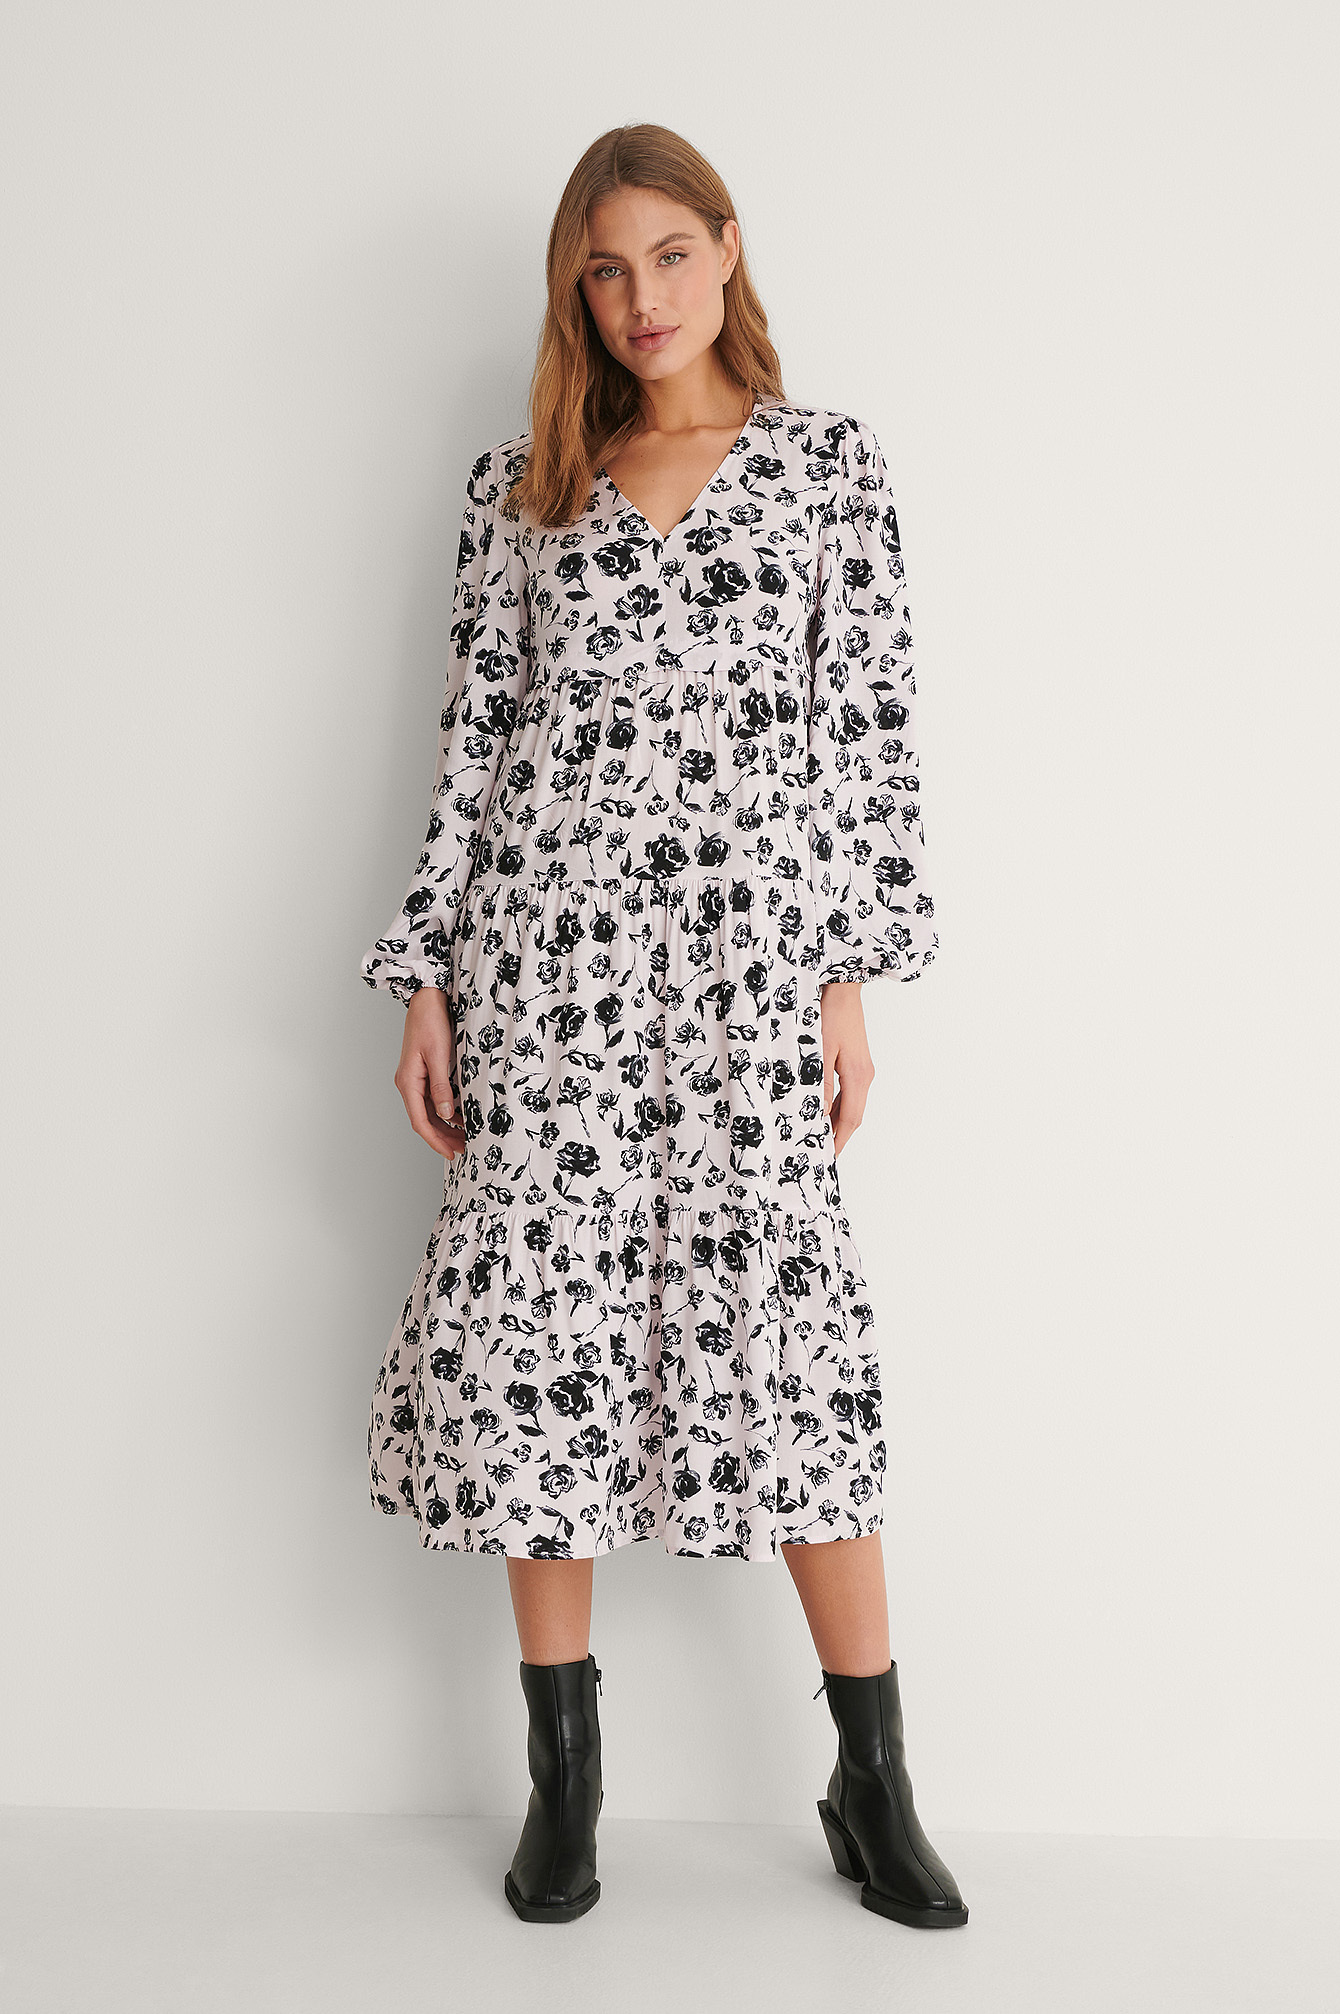 V-Neck LS Printed Dress Outfit.